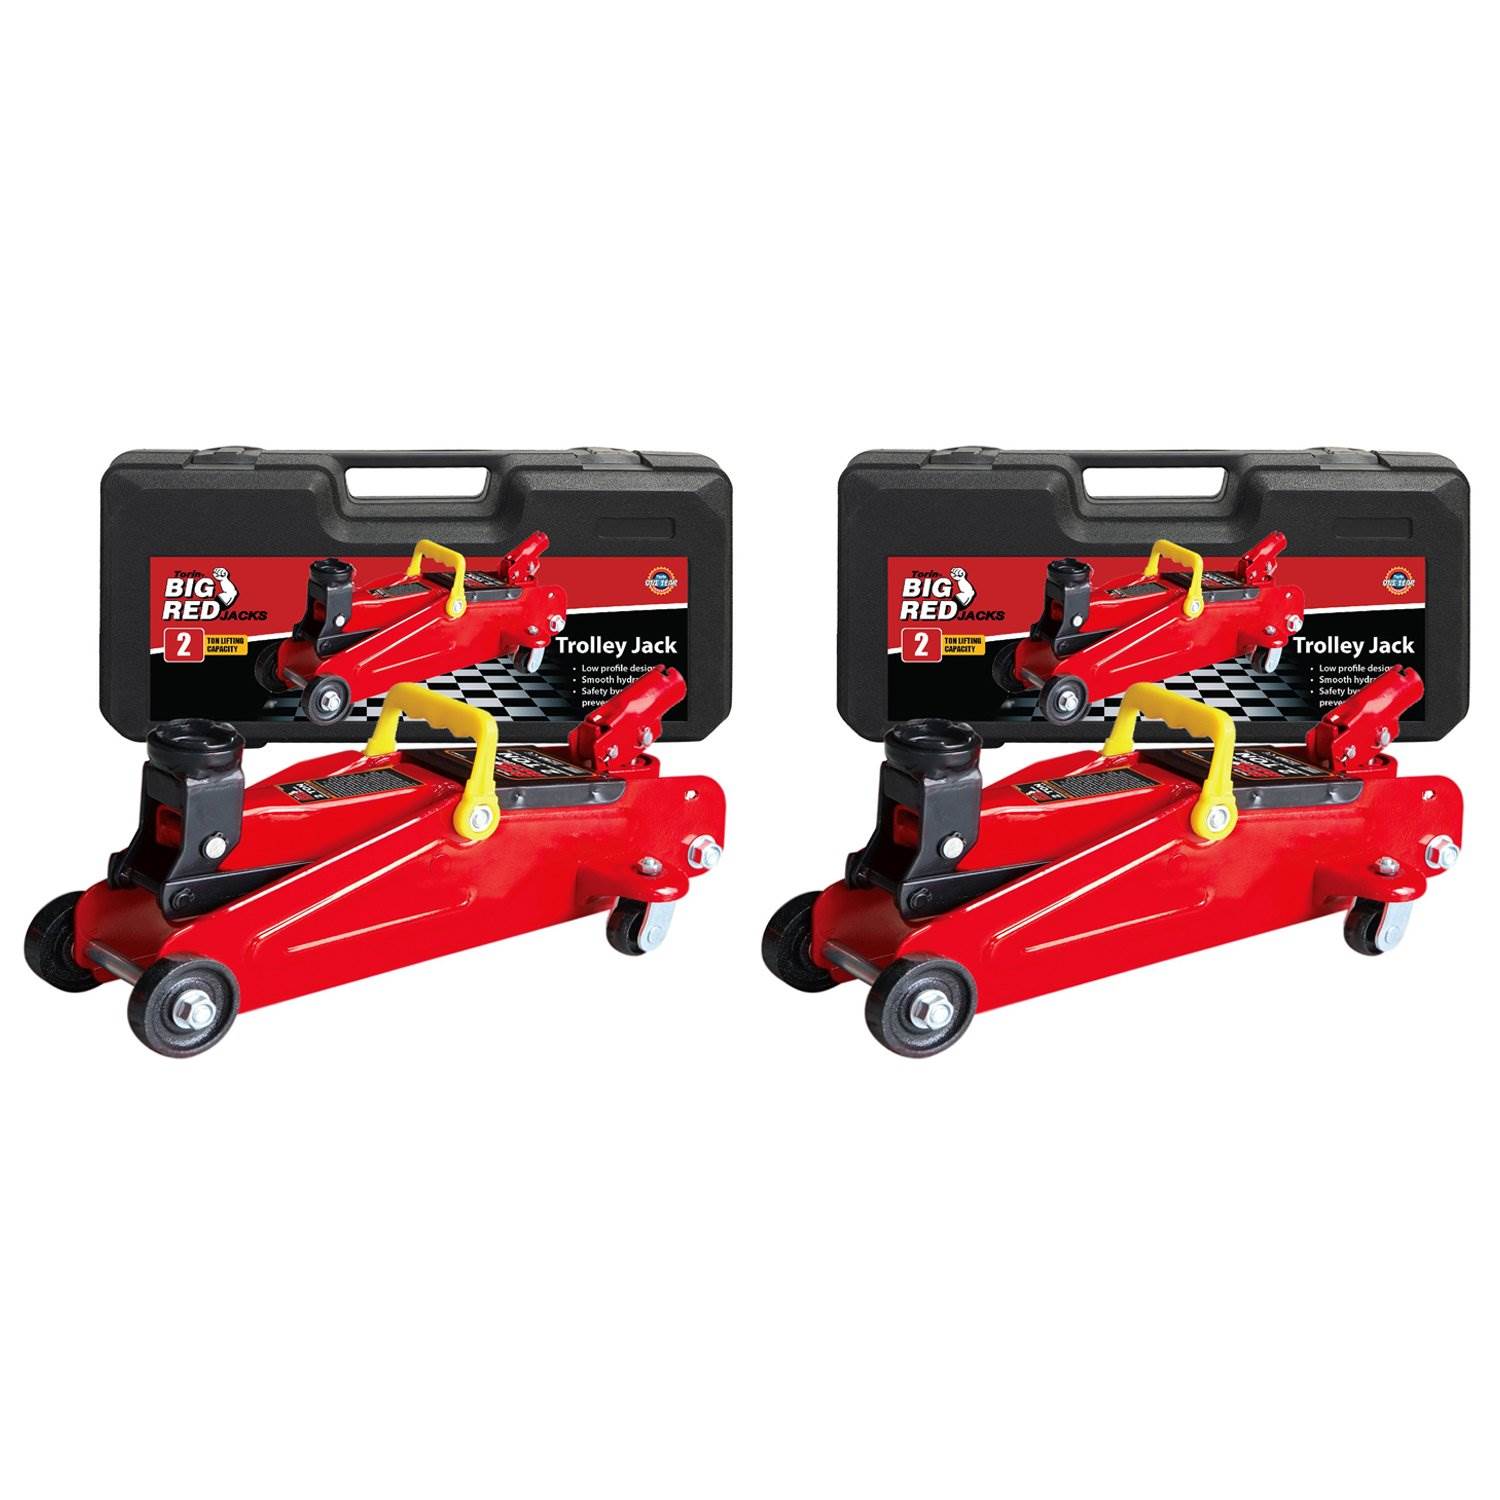 Torin Big Red Ton Hydraulic Swivel Trolley Floor Jack with Carry Case (2  Pack)